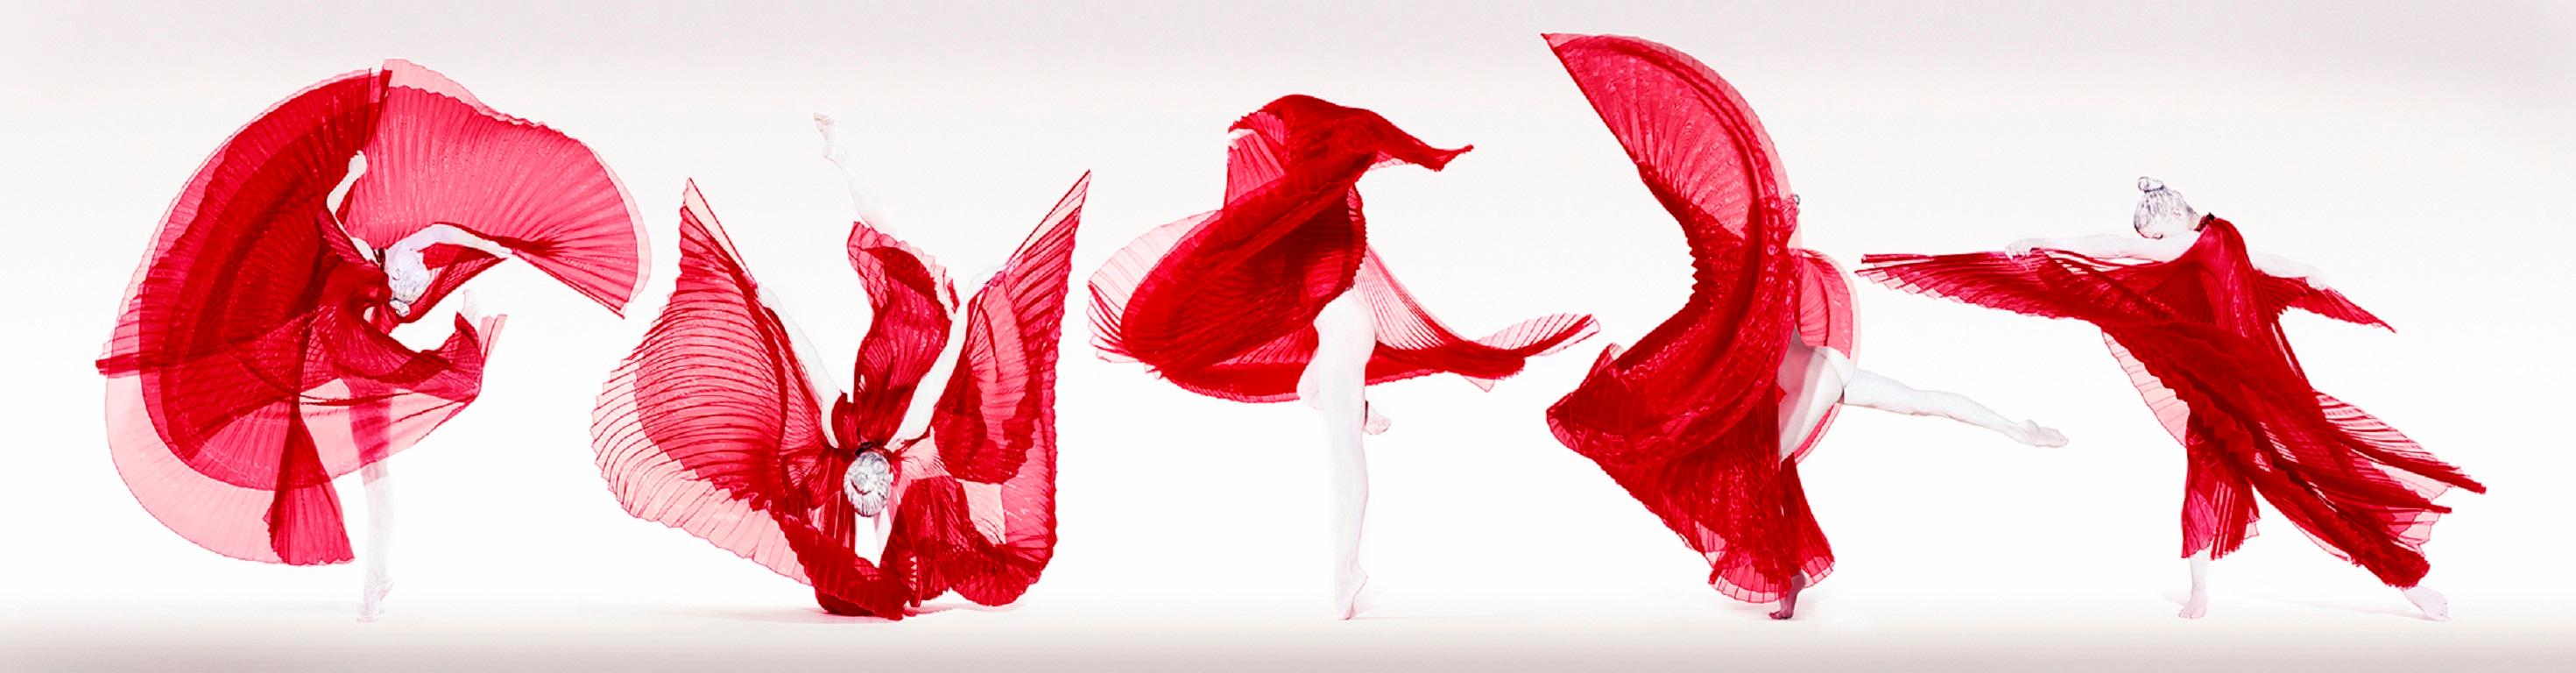 Guido Argentini Figurative Photograph - Stepping into the Unknown - nude photograph of female dancer with red background